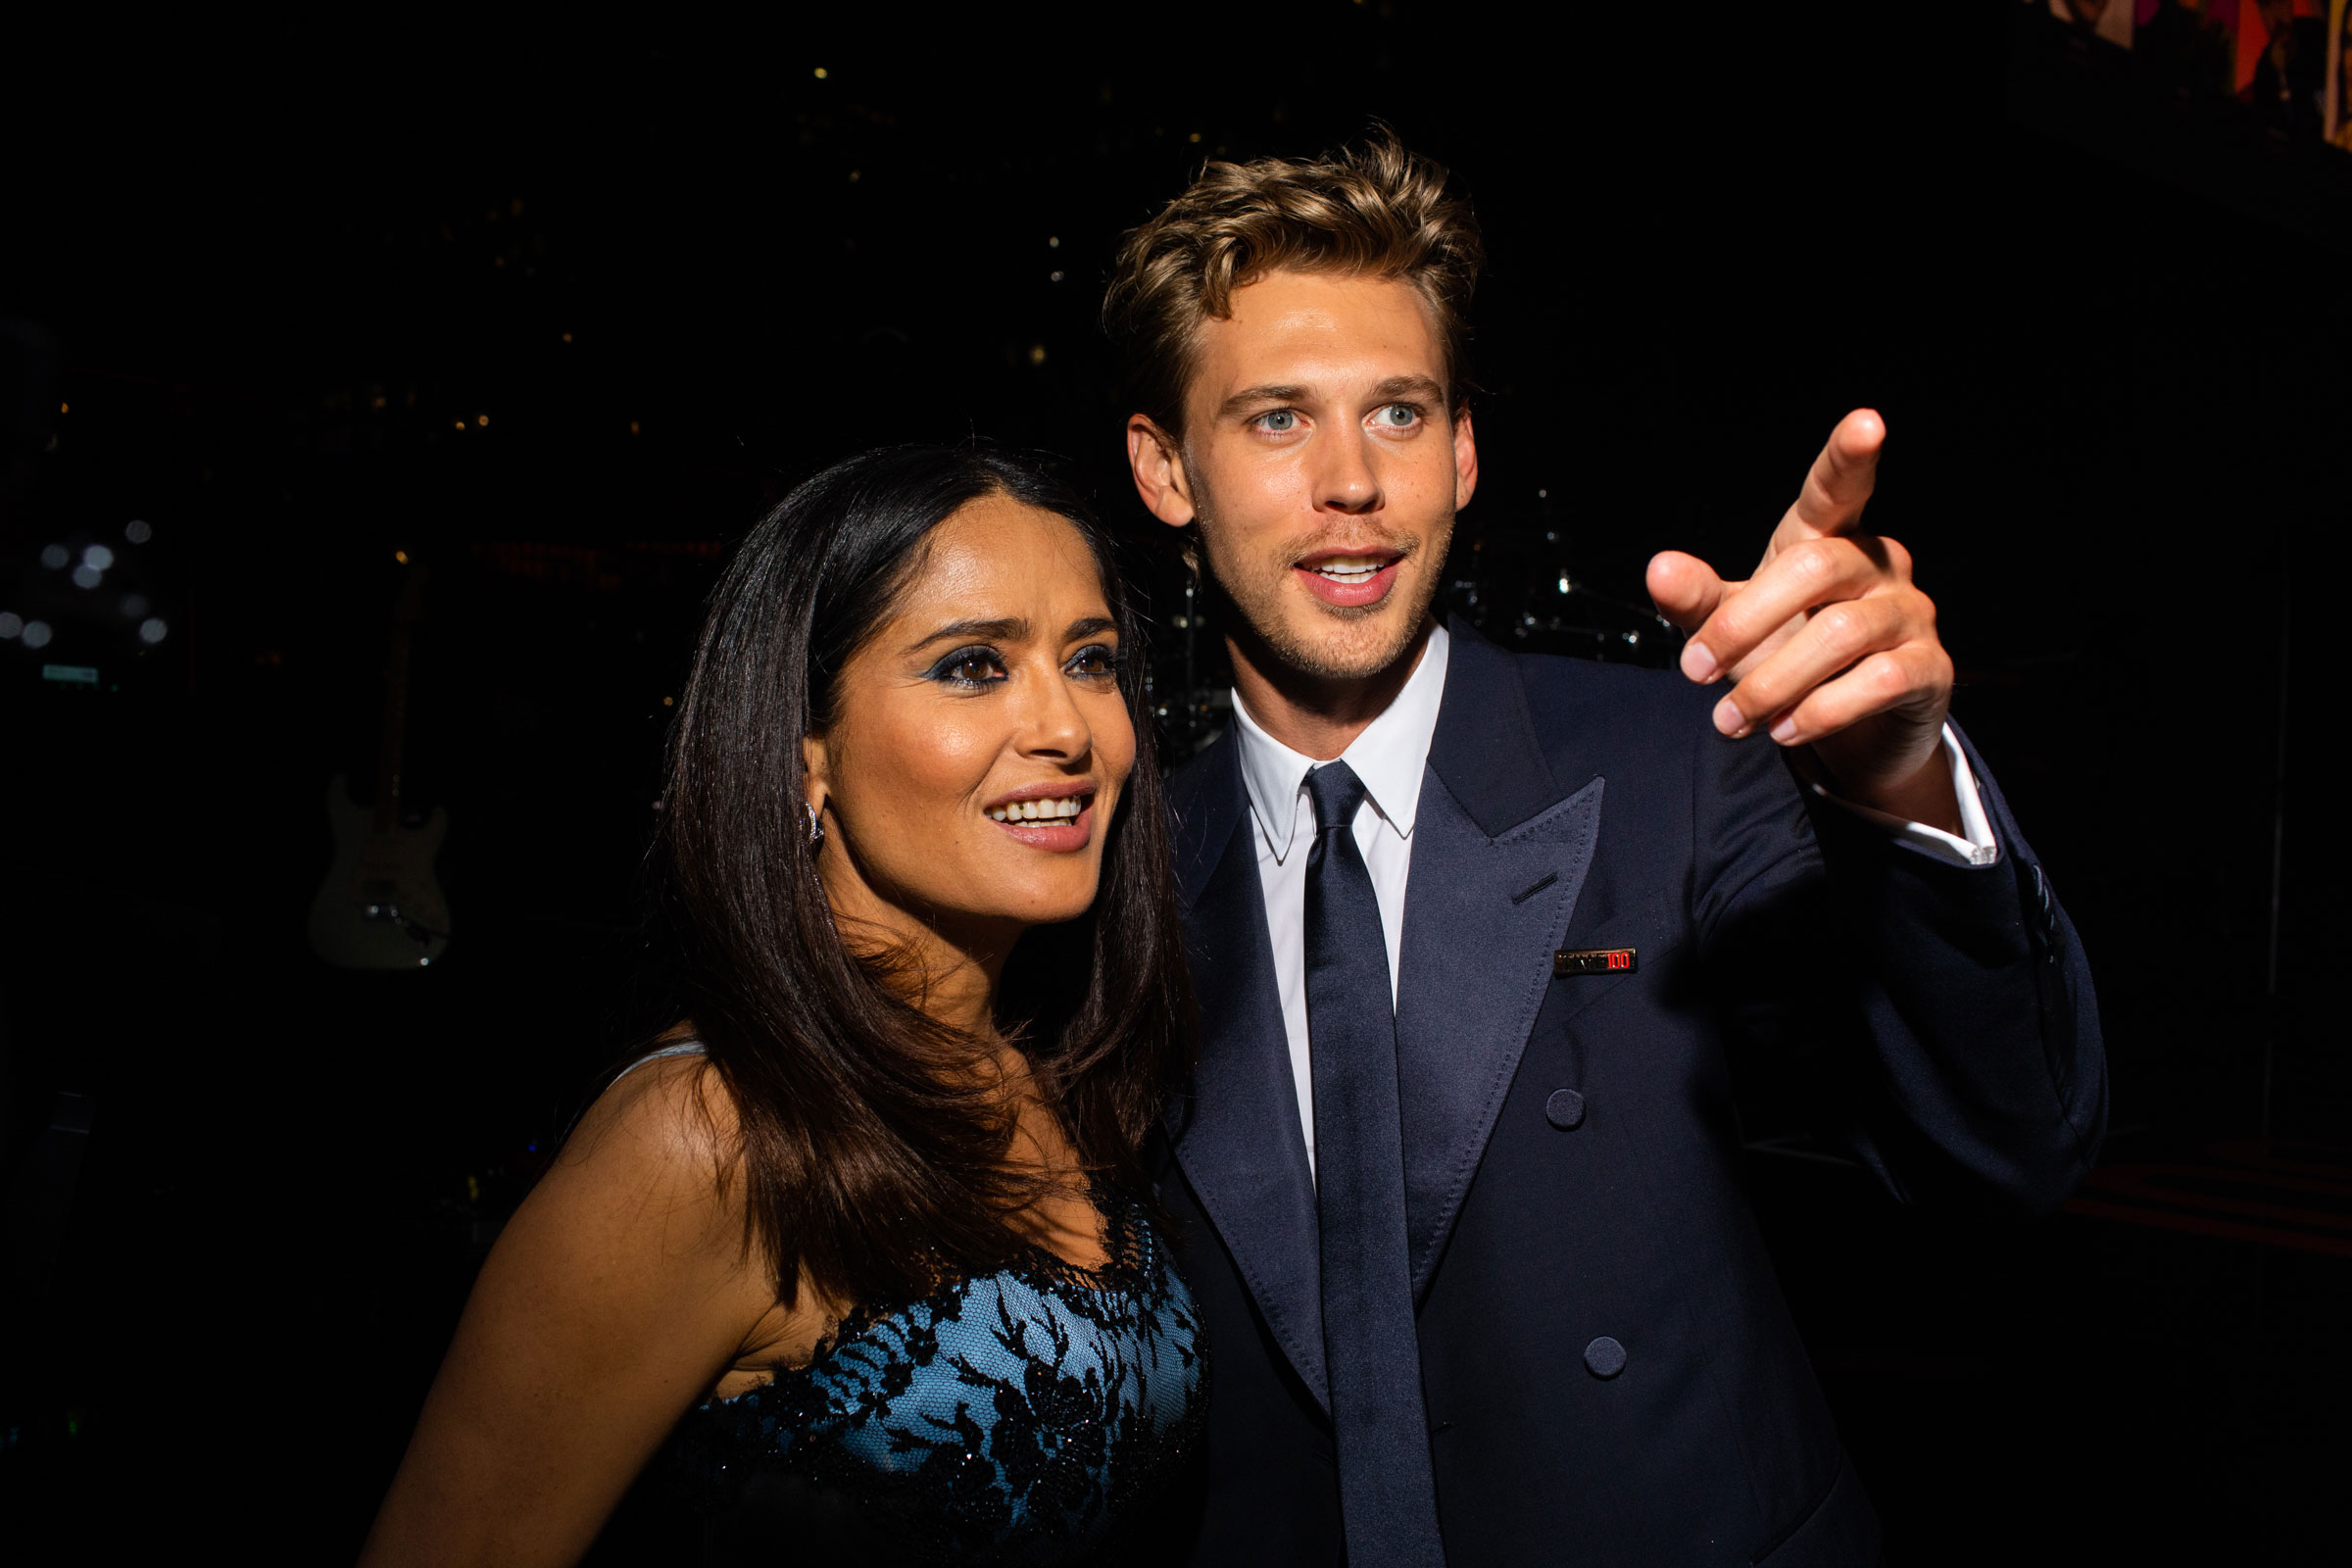 Salma Hayek Pinault and Austin Butler attend the TIME 100 Gala at Jazz at Lincoln Center in New York City, on April 26, 2023. (Landon Nordeman for TIME)